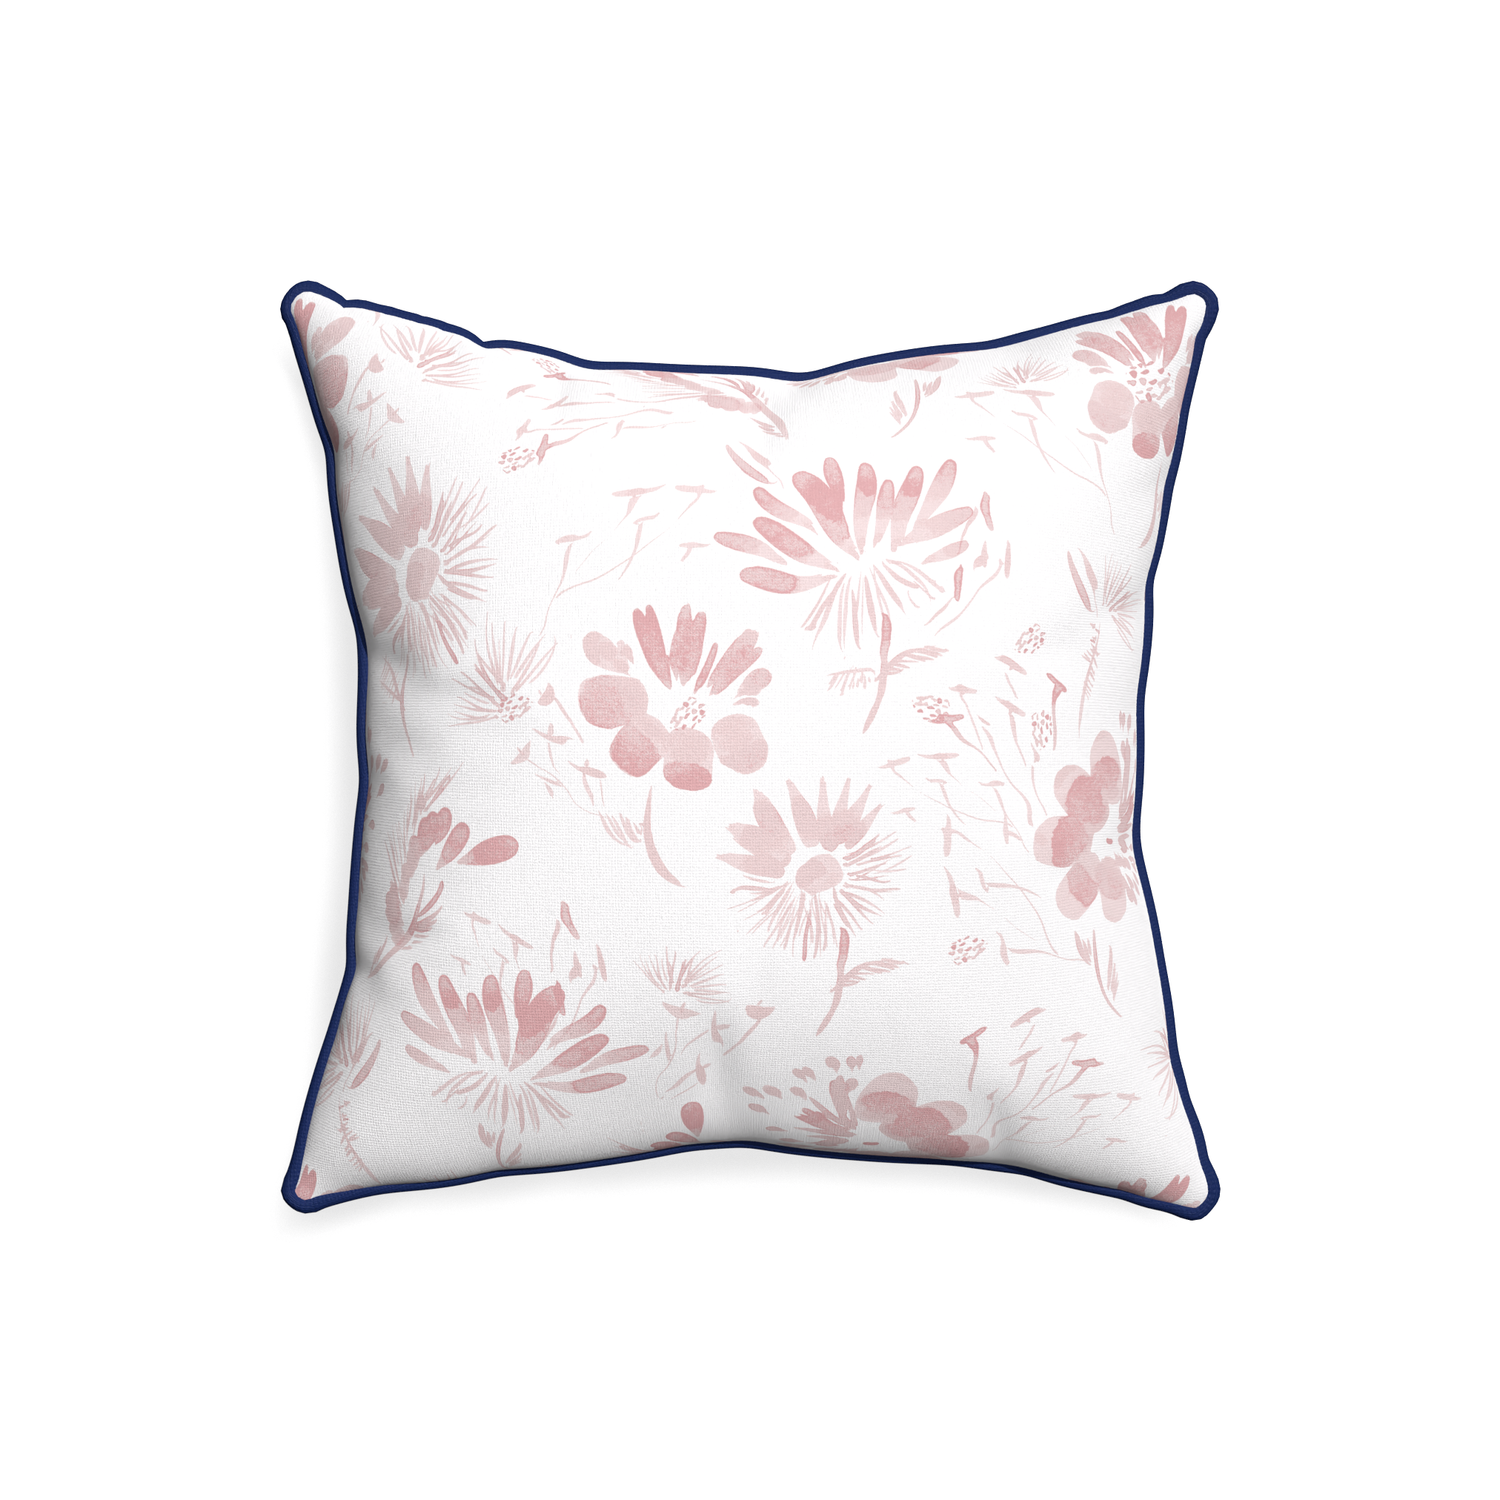 20-square blake custom pink floralpillow with midnight piping on white background